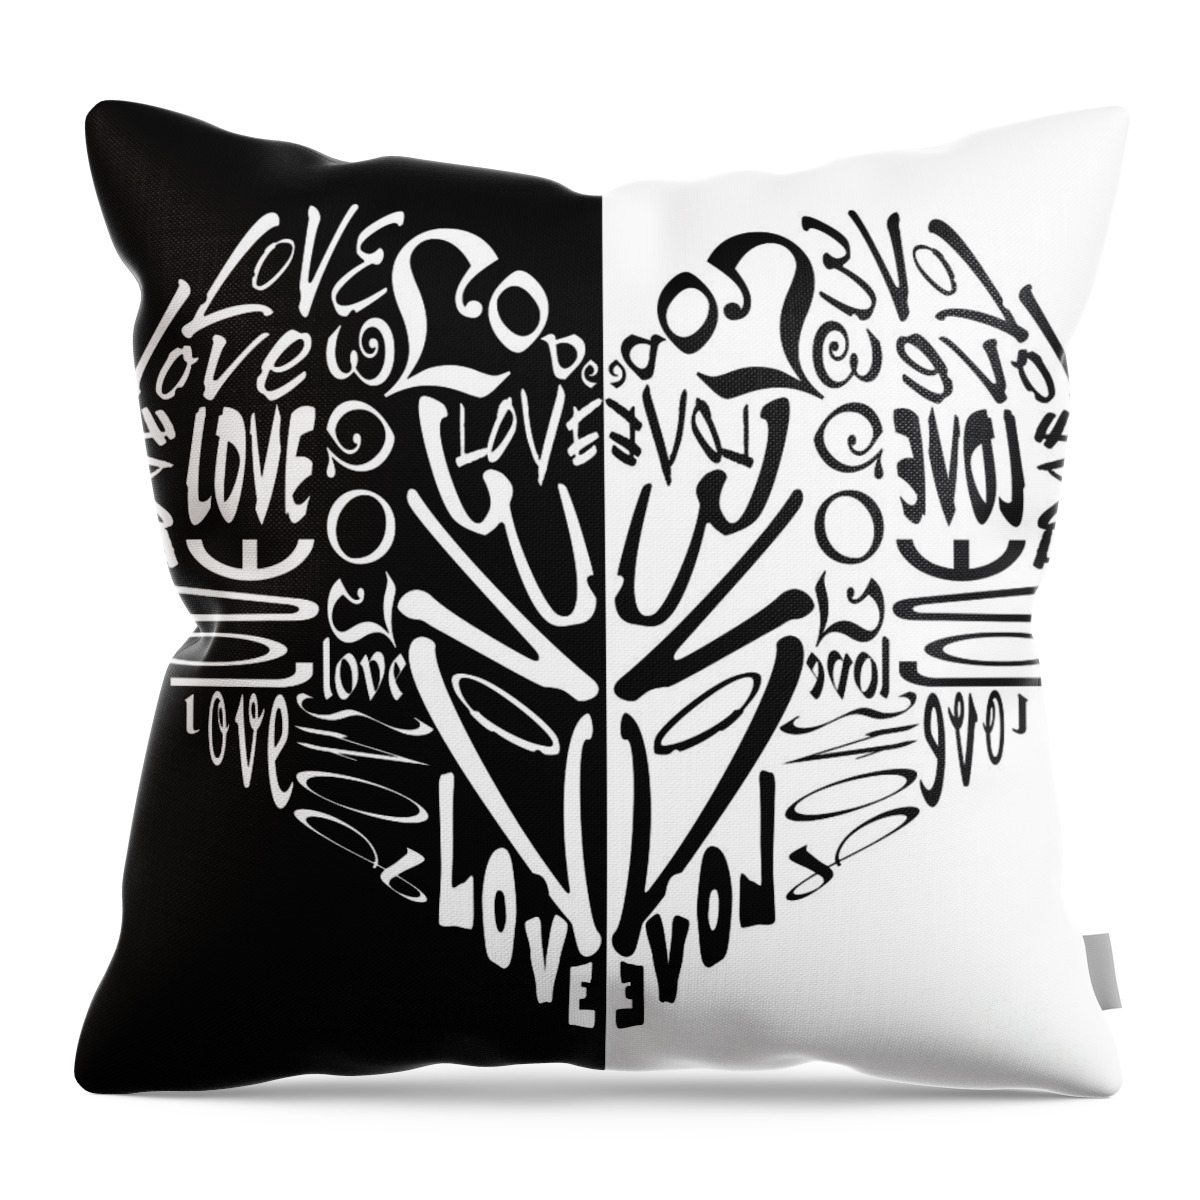 Wendy Wilton Throw Pillow featuring the digital art Love Heart 1 by Wendy Wilton